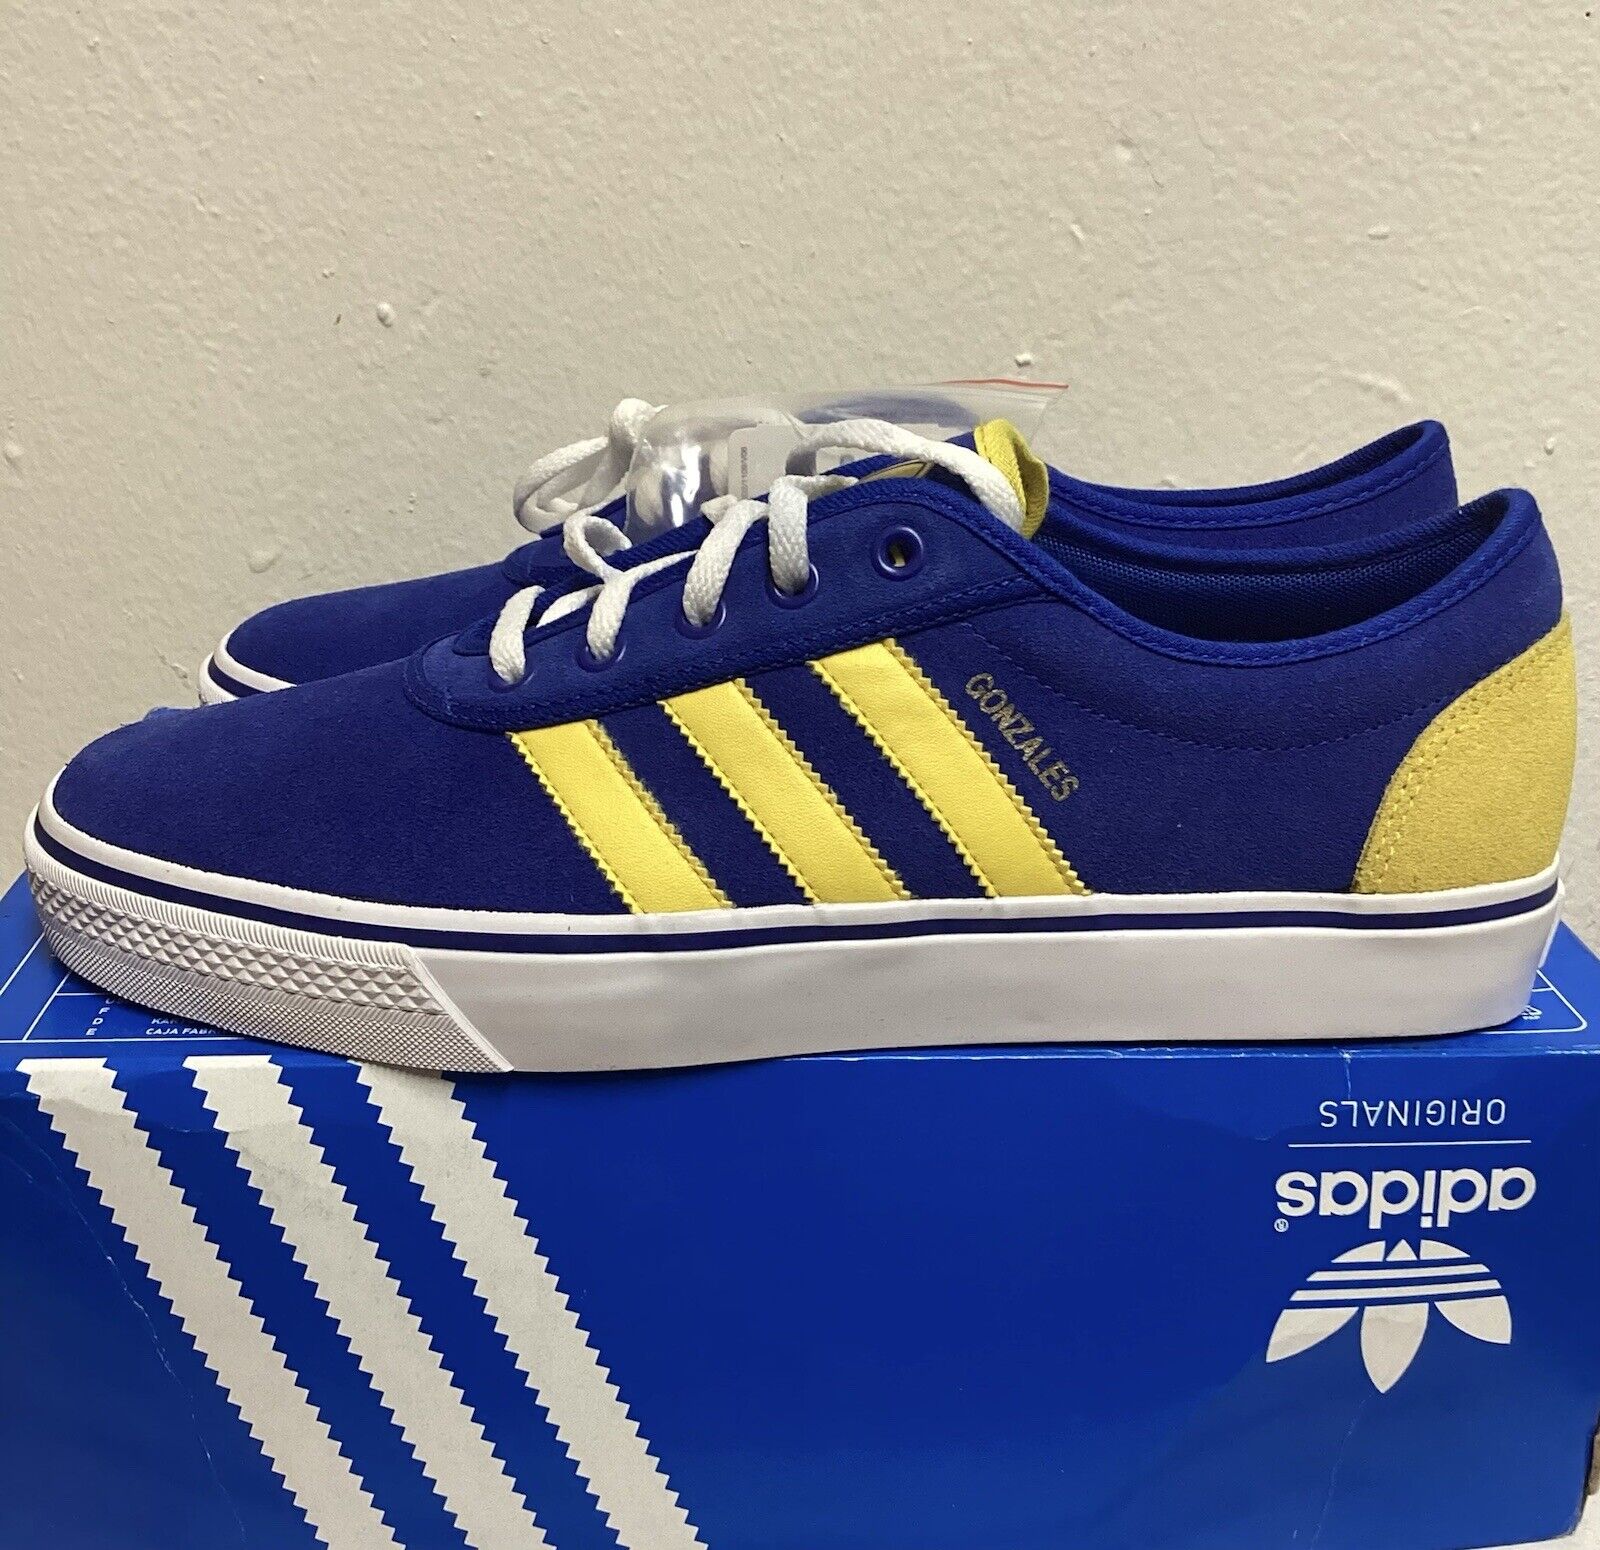 ADIDAS ADI EASE-GONZ GONZALES ) ( BLUE/YELLOW ) SNEAKERS SHOES 10 G21280